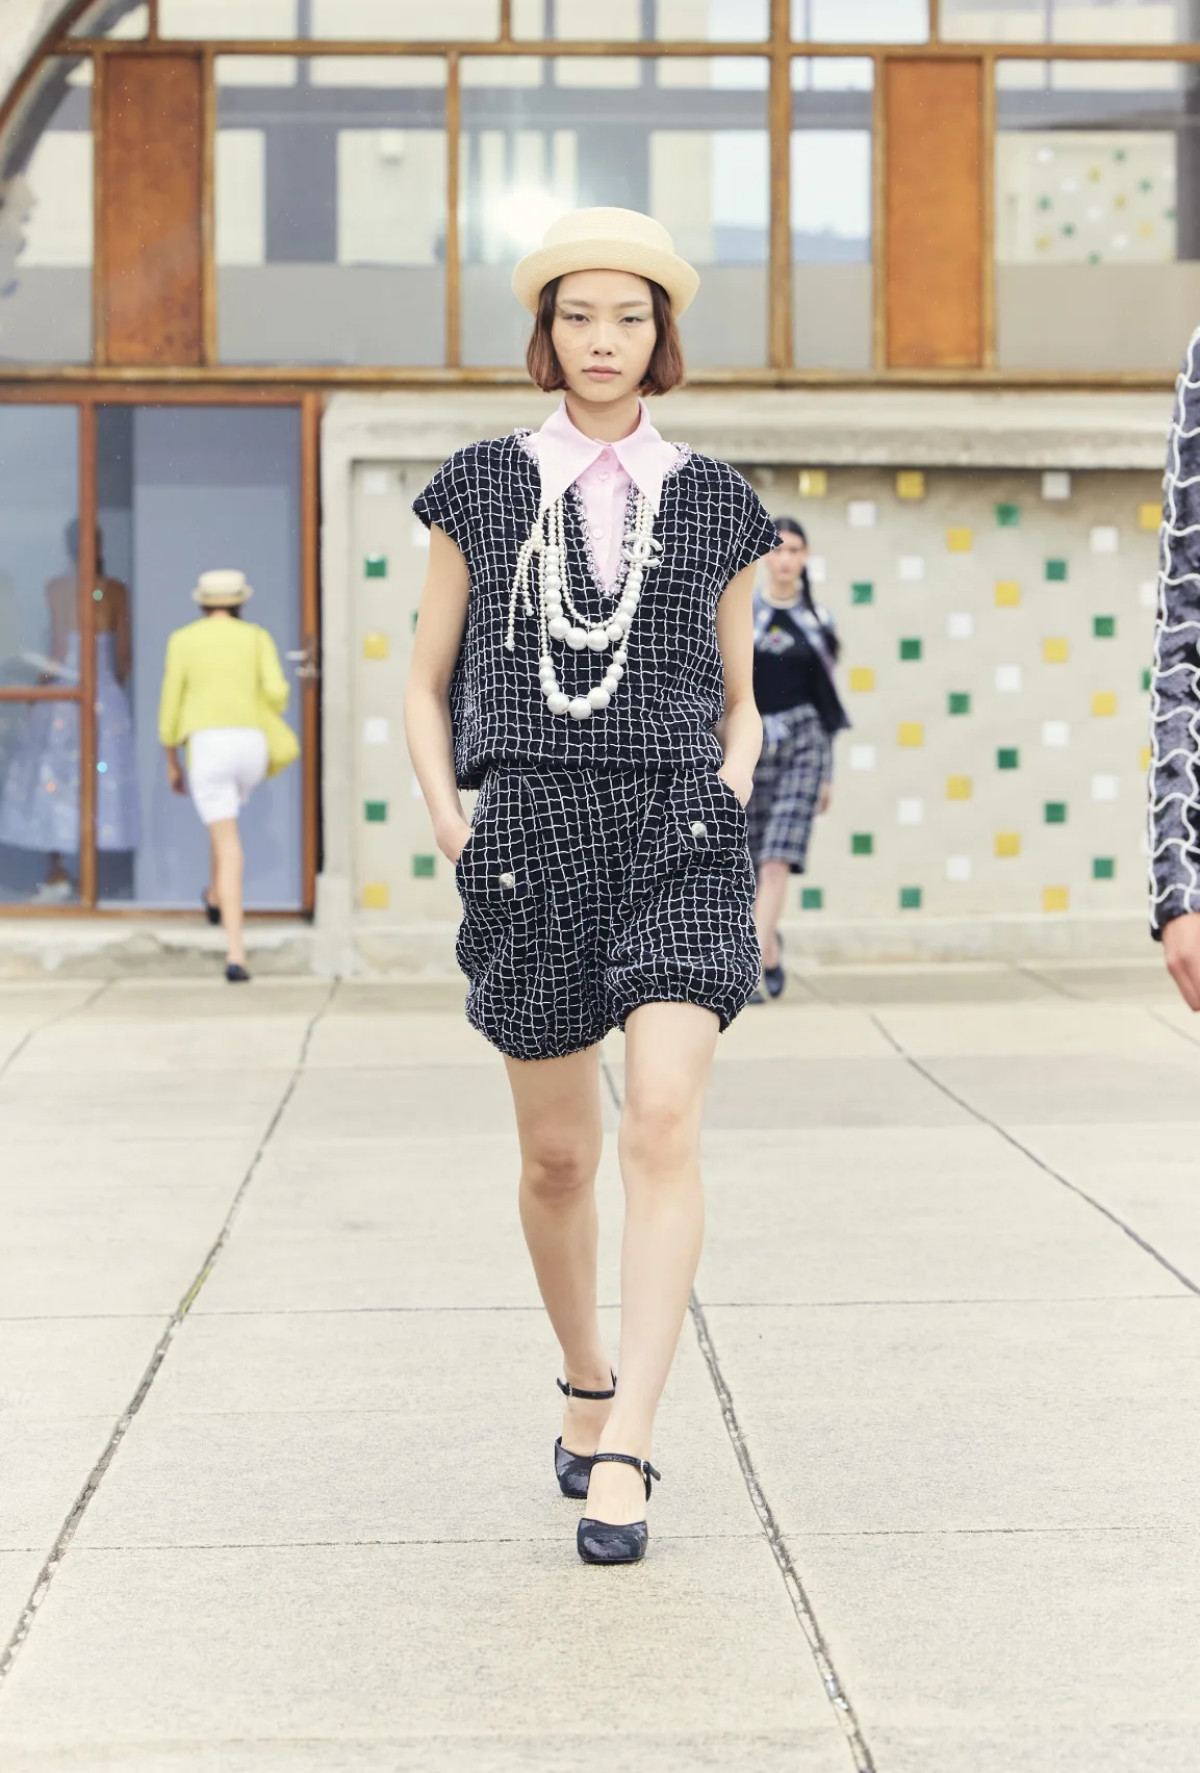 Chanel Cruise 2024/25 solar energy of Marseille in the new collection of Virginie Viard